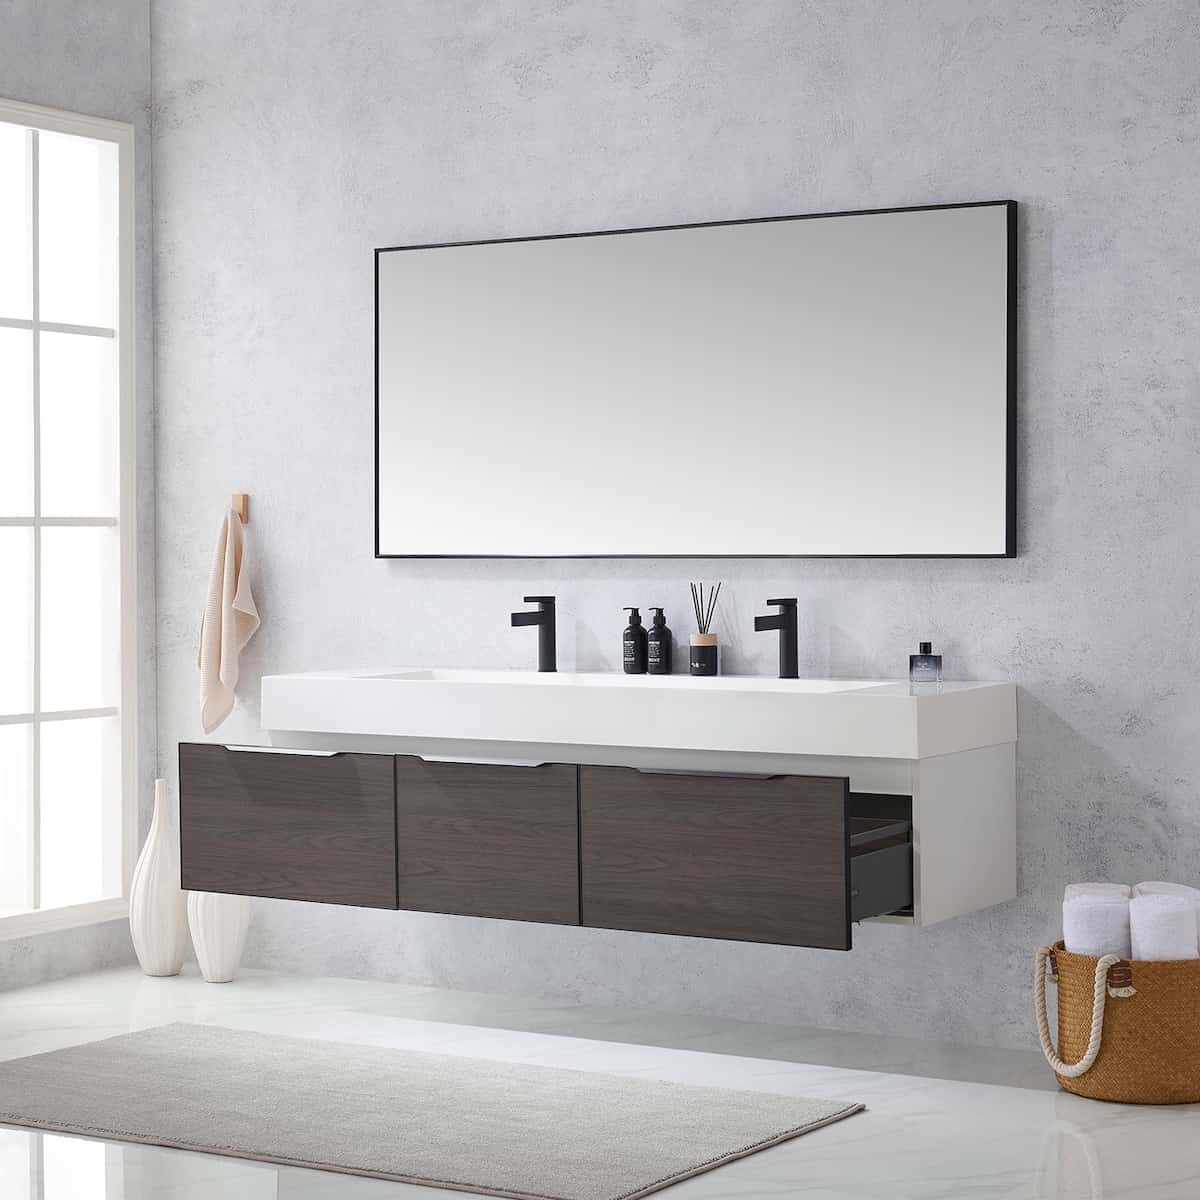 Vinnova Vegadeo 72 Inch Wall Mount Double Sink Bath Vanity in Suleiman Oak Finish with White One-Piece Composite Stone Sink Top With Mirror Drawers 703472-SO-WH